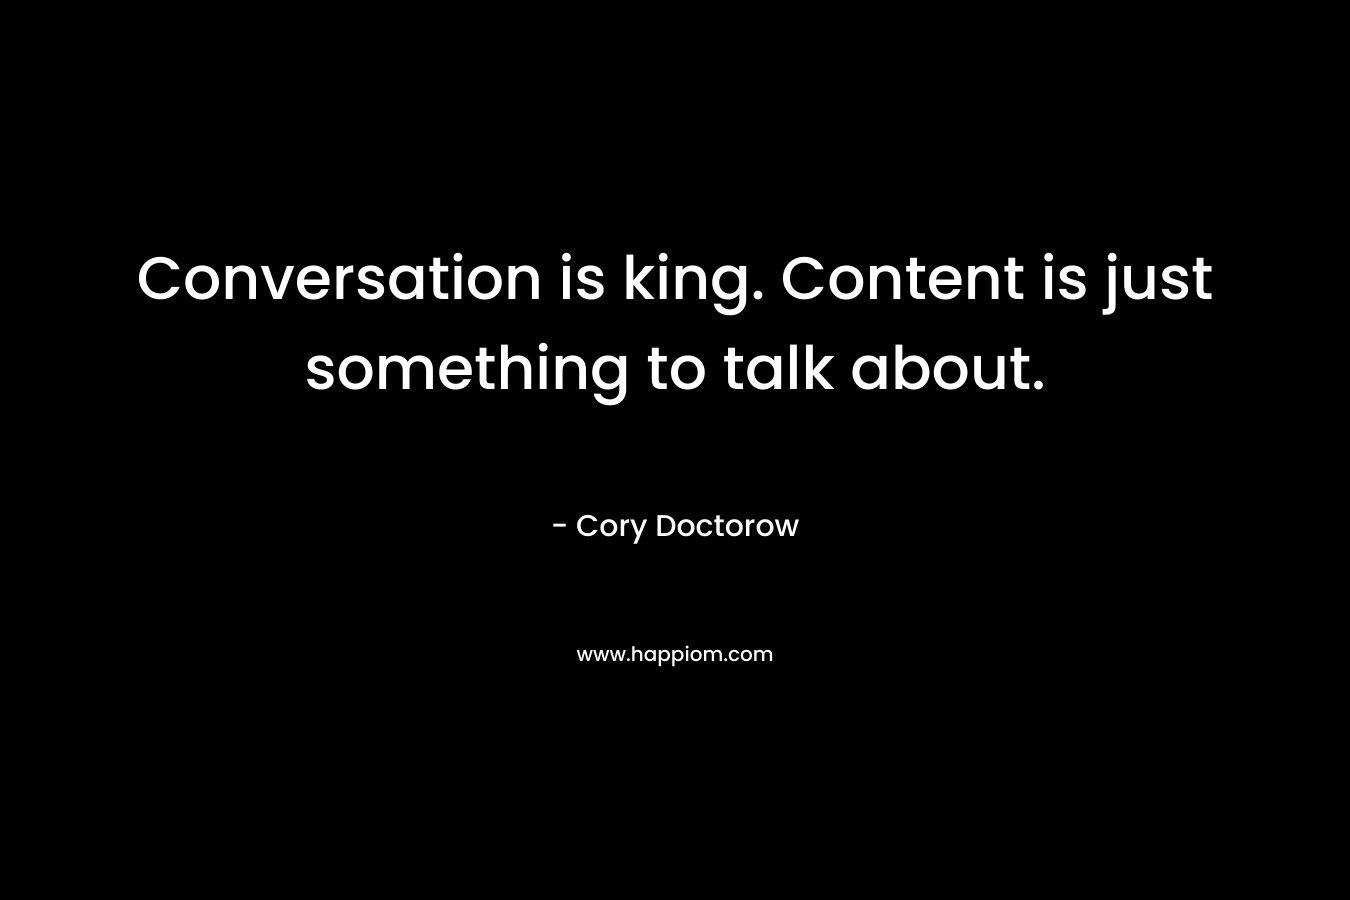 Conversation is king. Content is just something to talk about. – Cory Doctorow